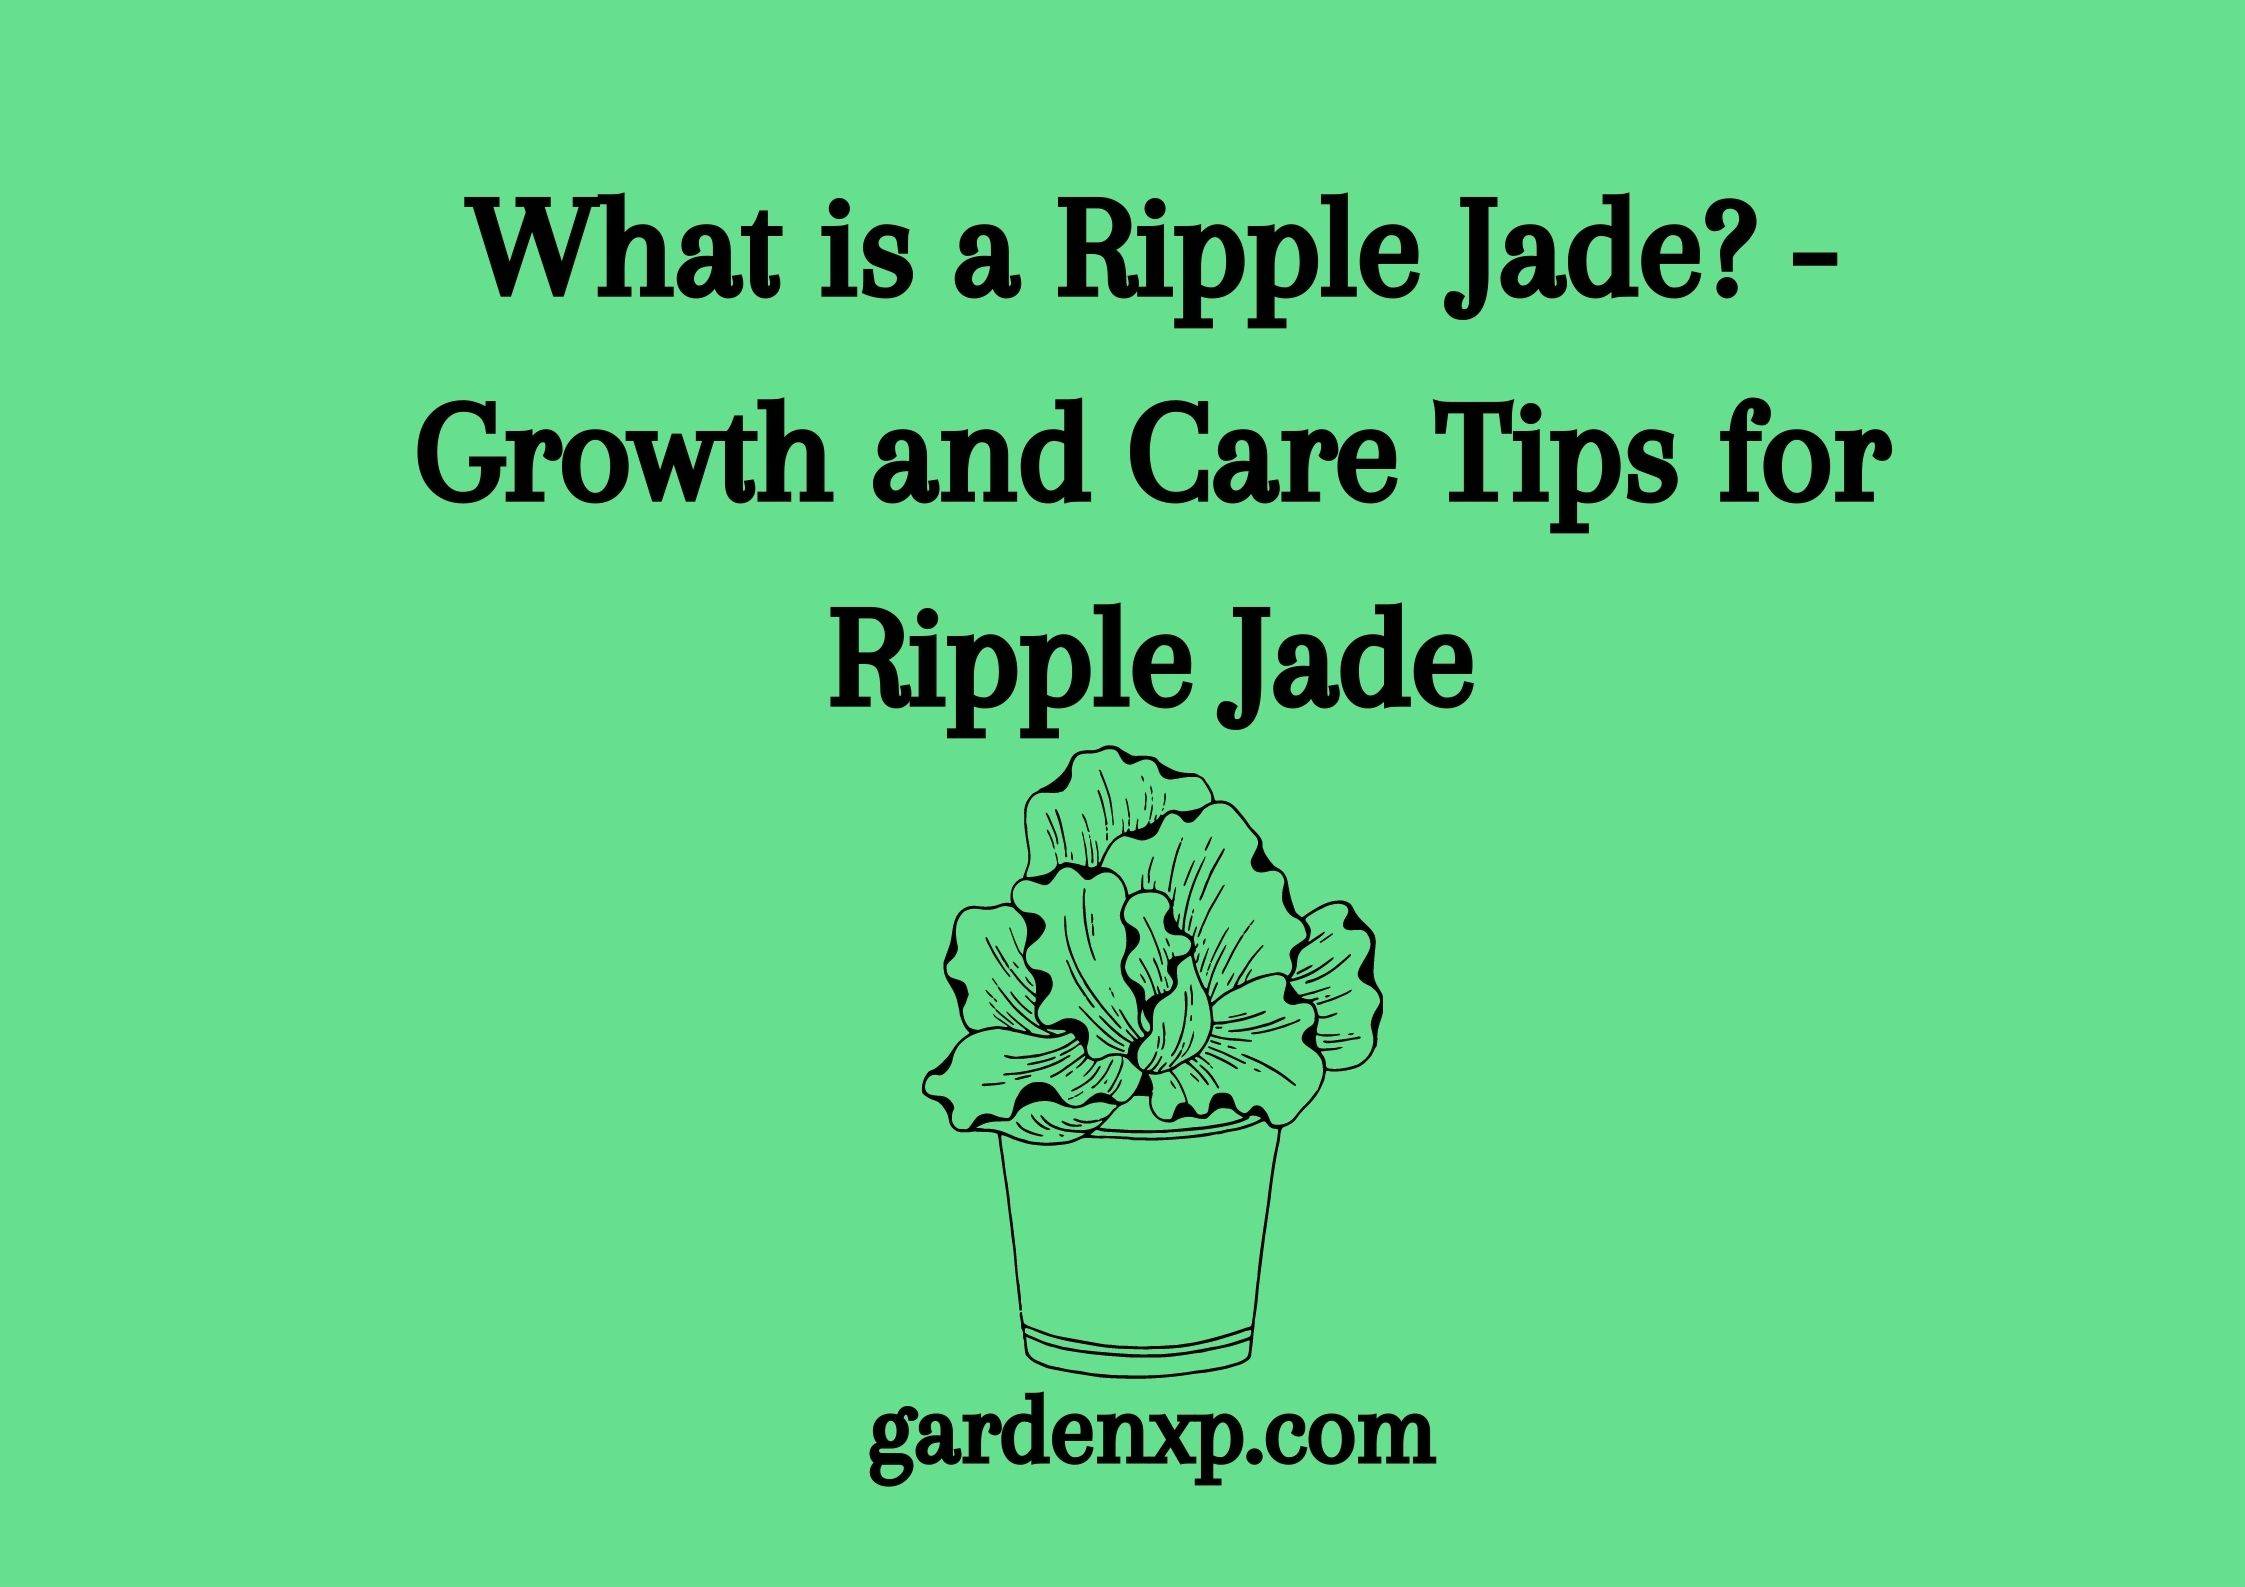 What is a Ripple Jade? - Growth and Care Tips for Ripple Jade